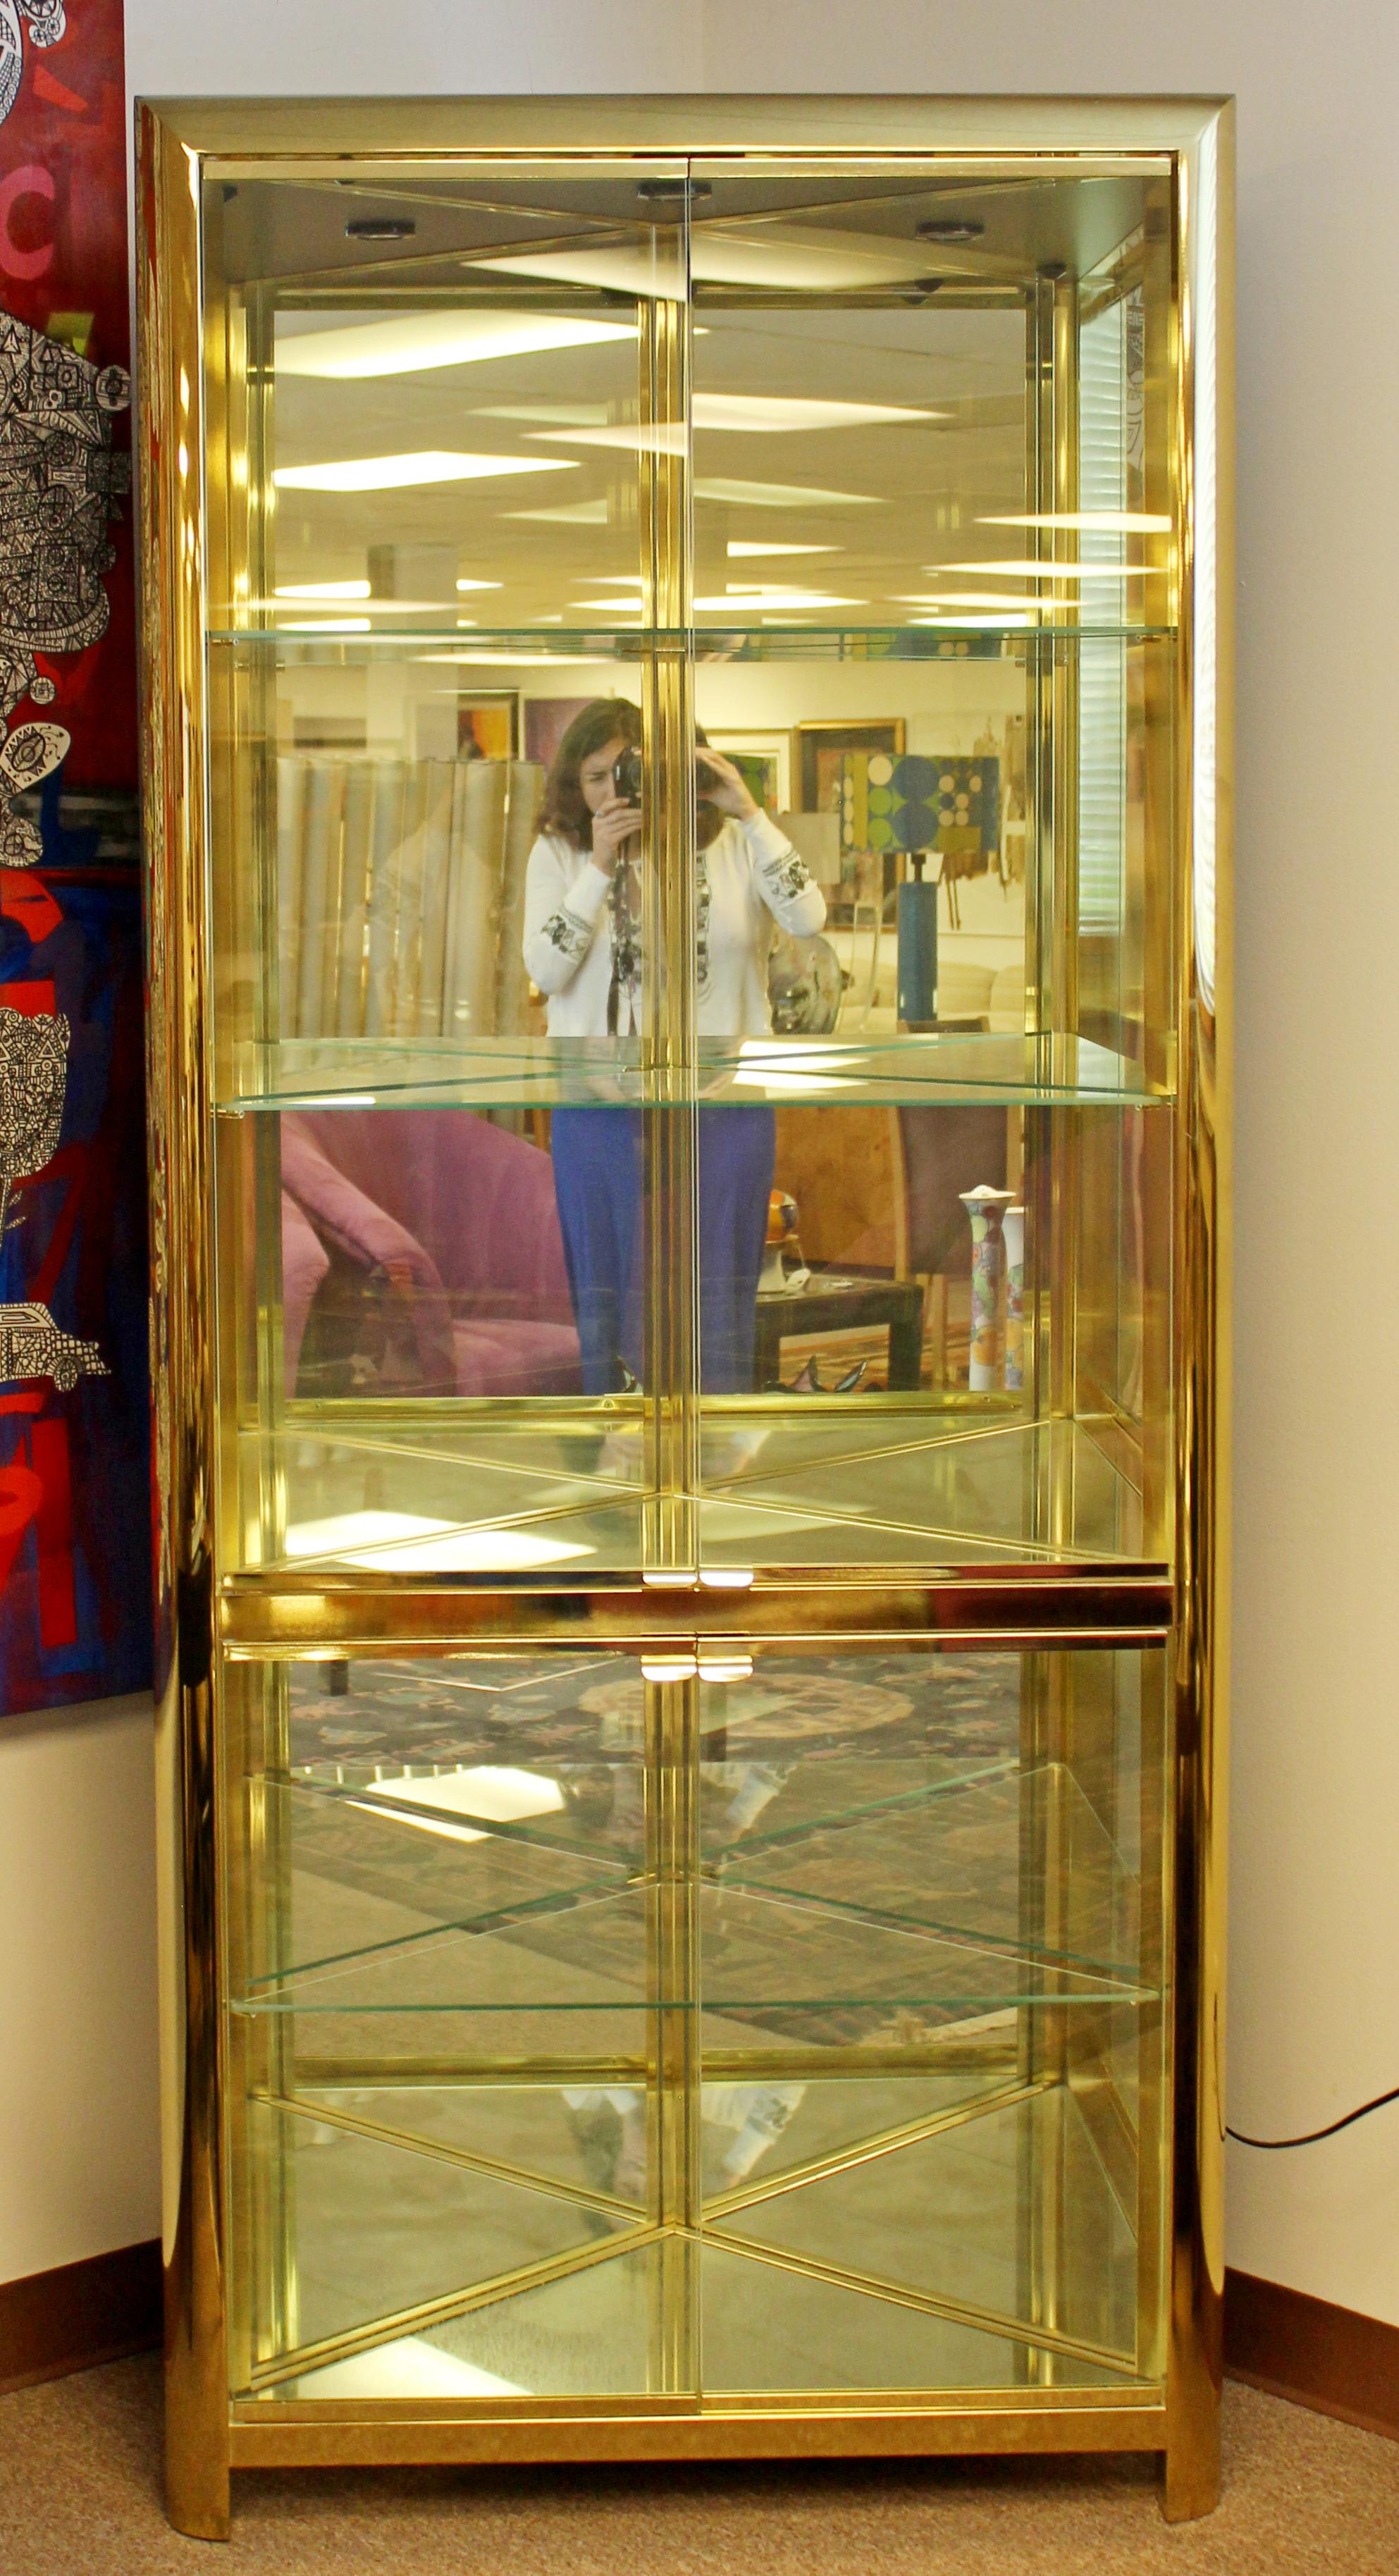 For your consideration is a lux looking, light up, brass and glass shelving unit corner cabinet, with five shelves, by Mastercraft, circa 1970s. In excellent vintage condition. The dimensions are 35